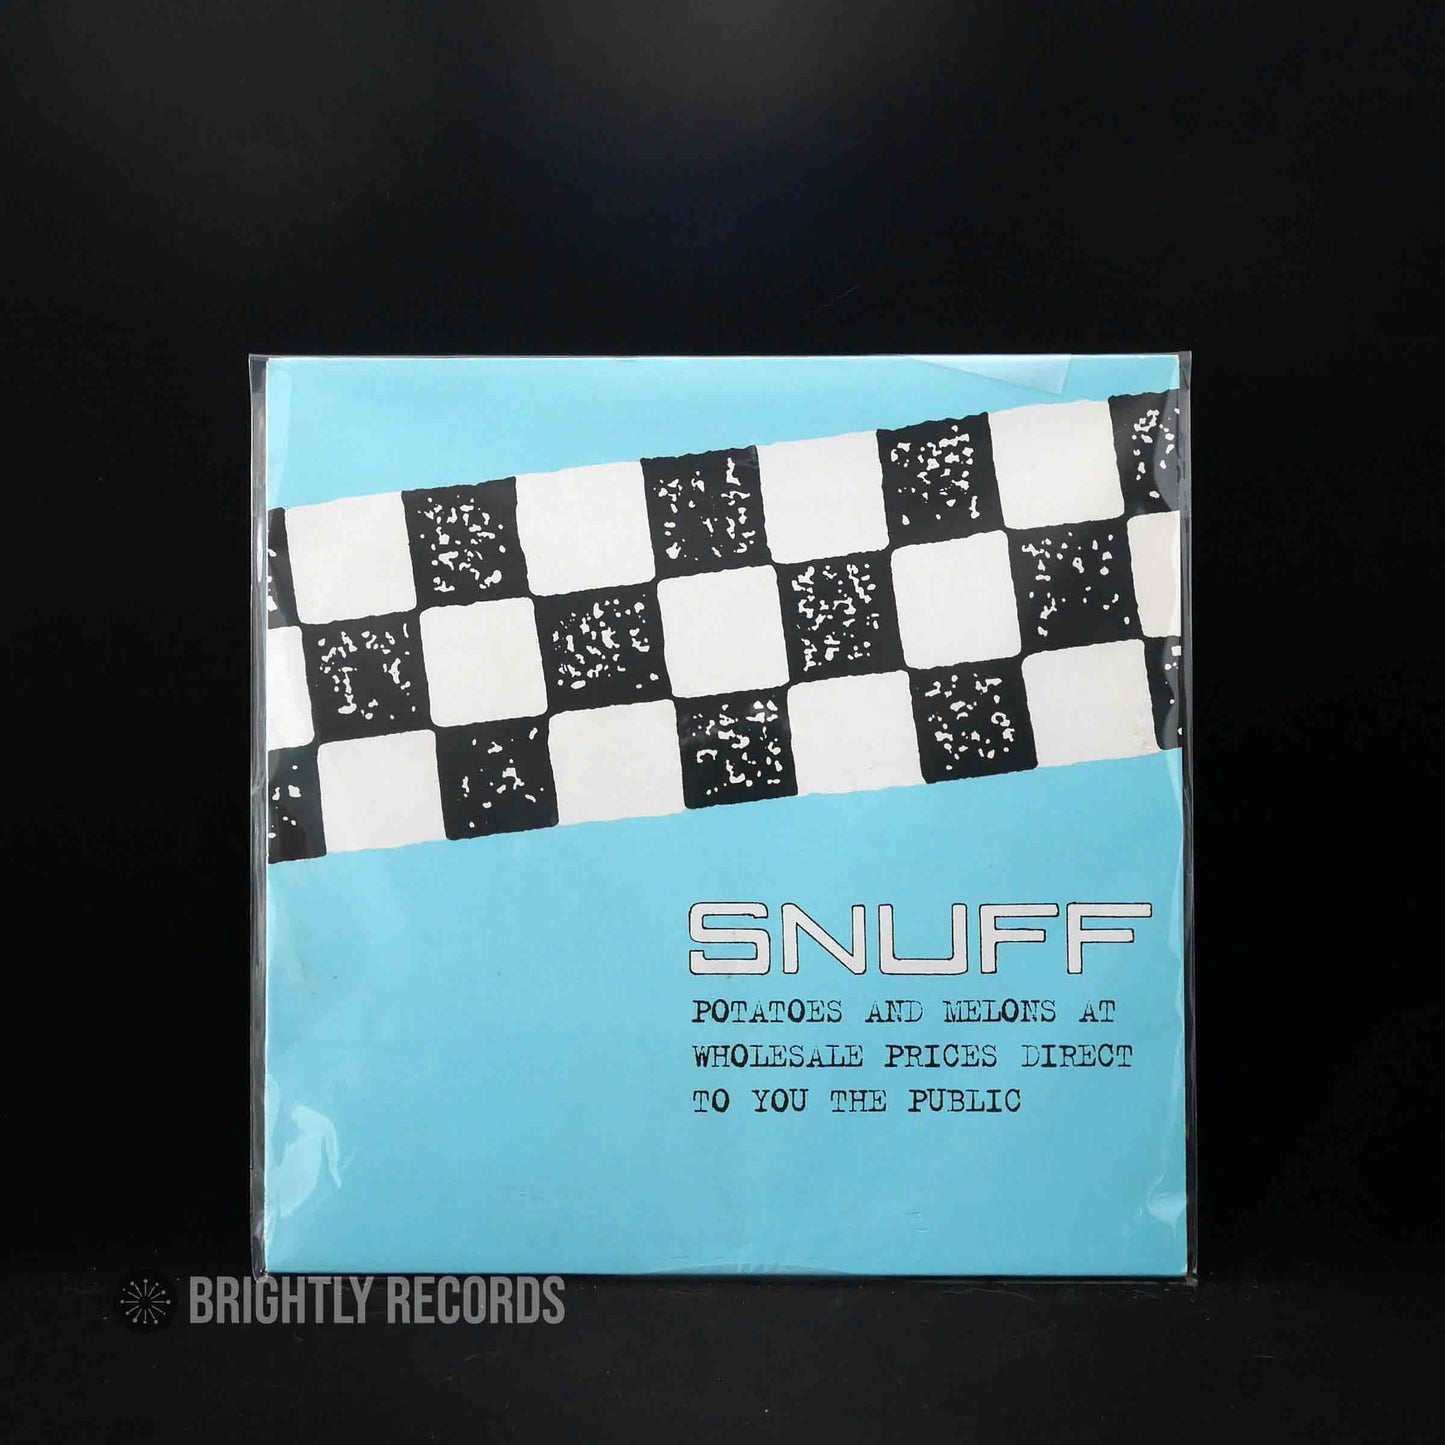 Snuff - Potatoes & Melons at Wholesale Prices Direct To You The Public 10"